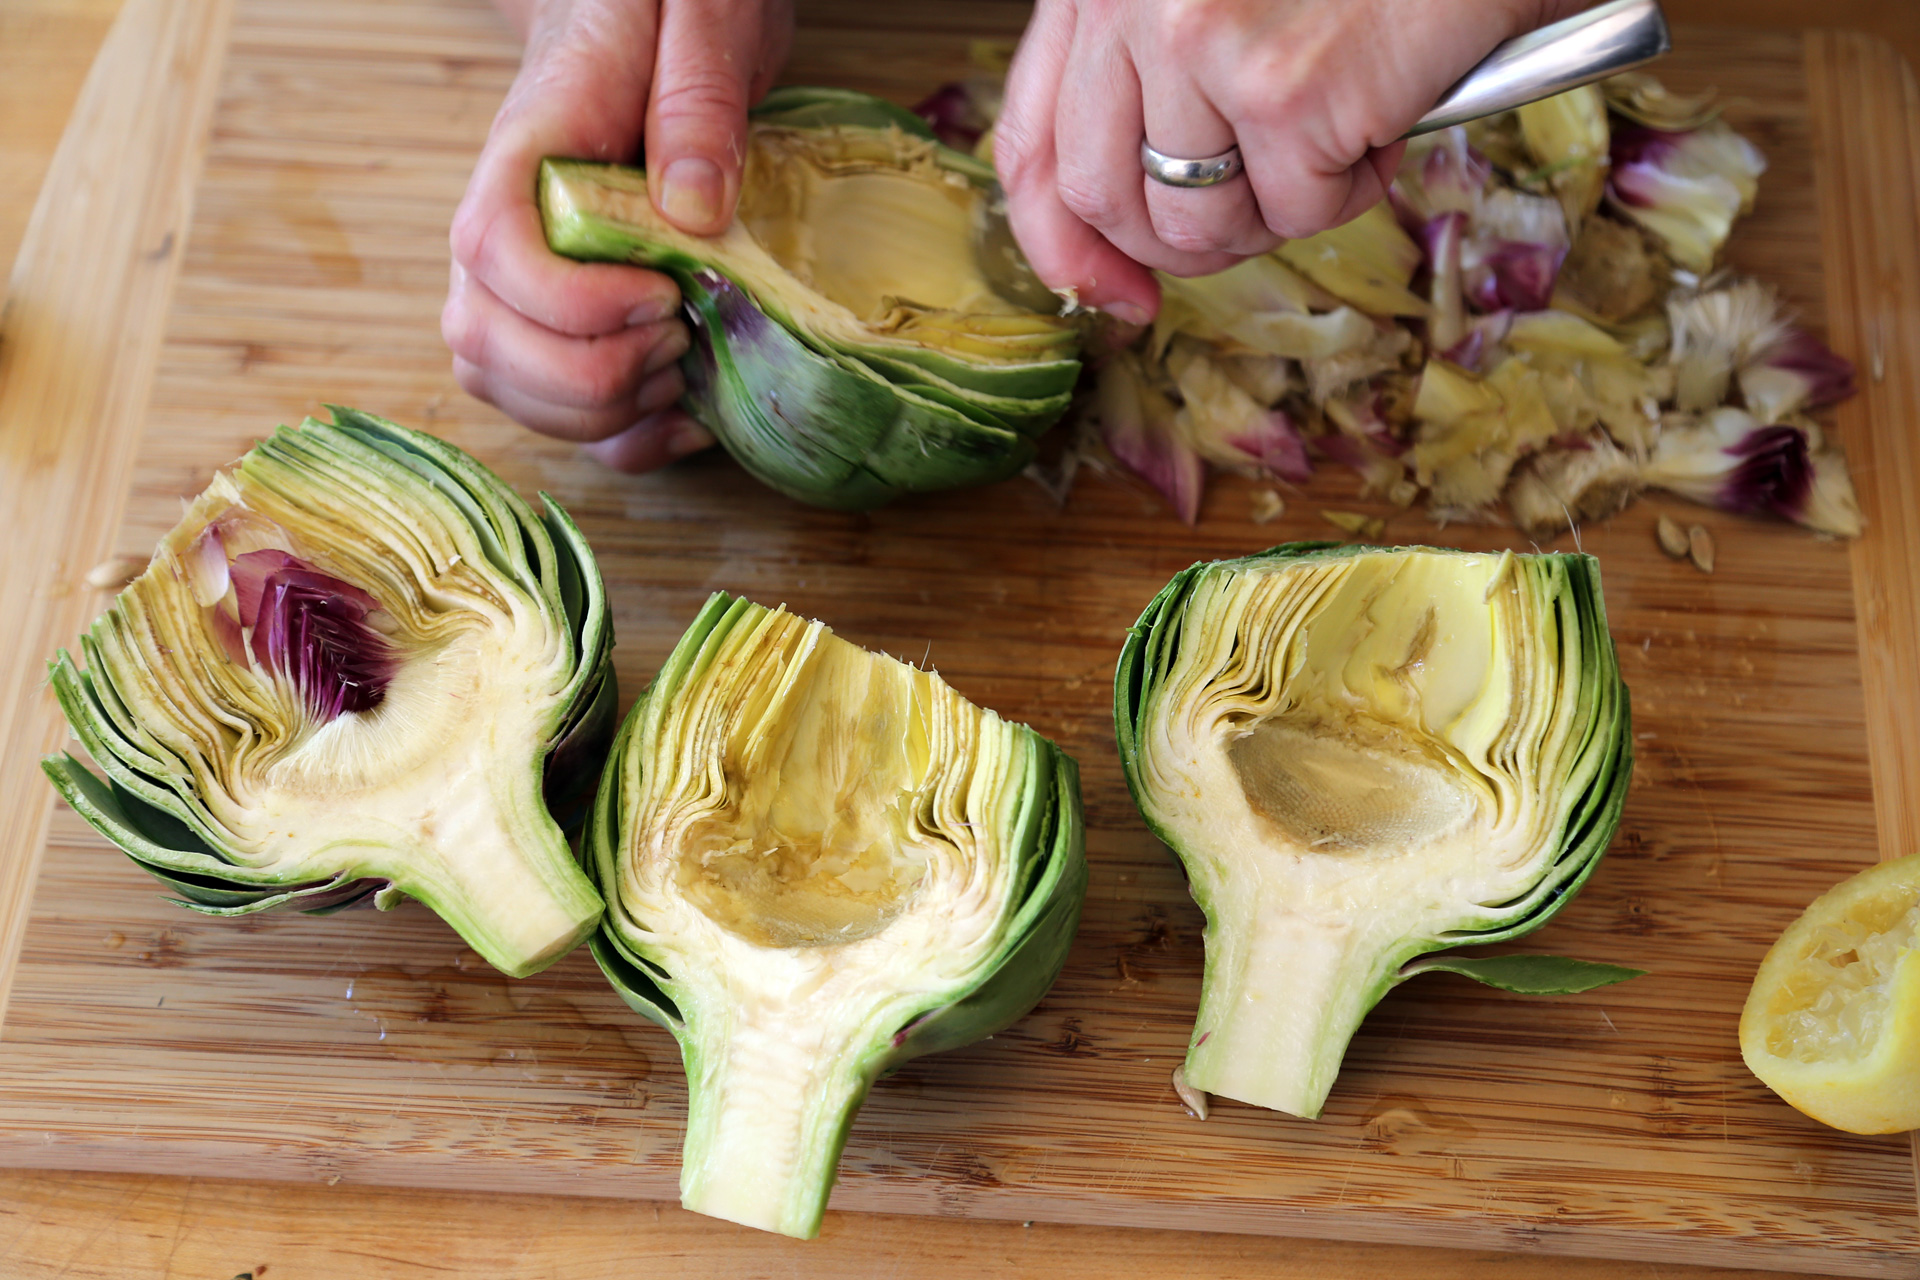 Use a small metal spoon to scoop out and remove the fuzzy chokes and the smaller inner leaves; discard. Rub the artichoke halves all over with the lemon.